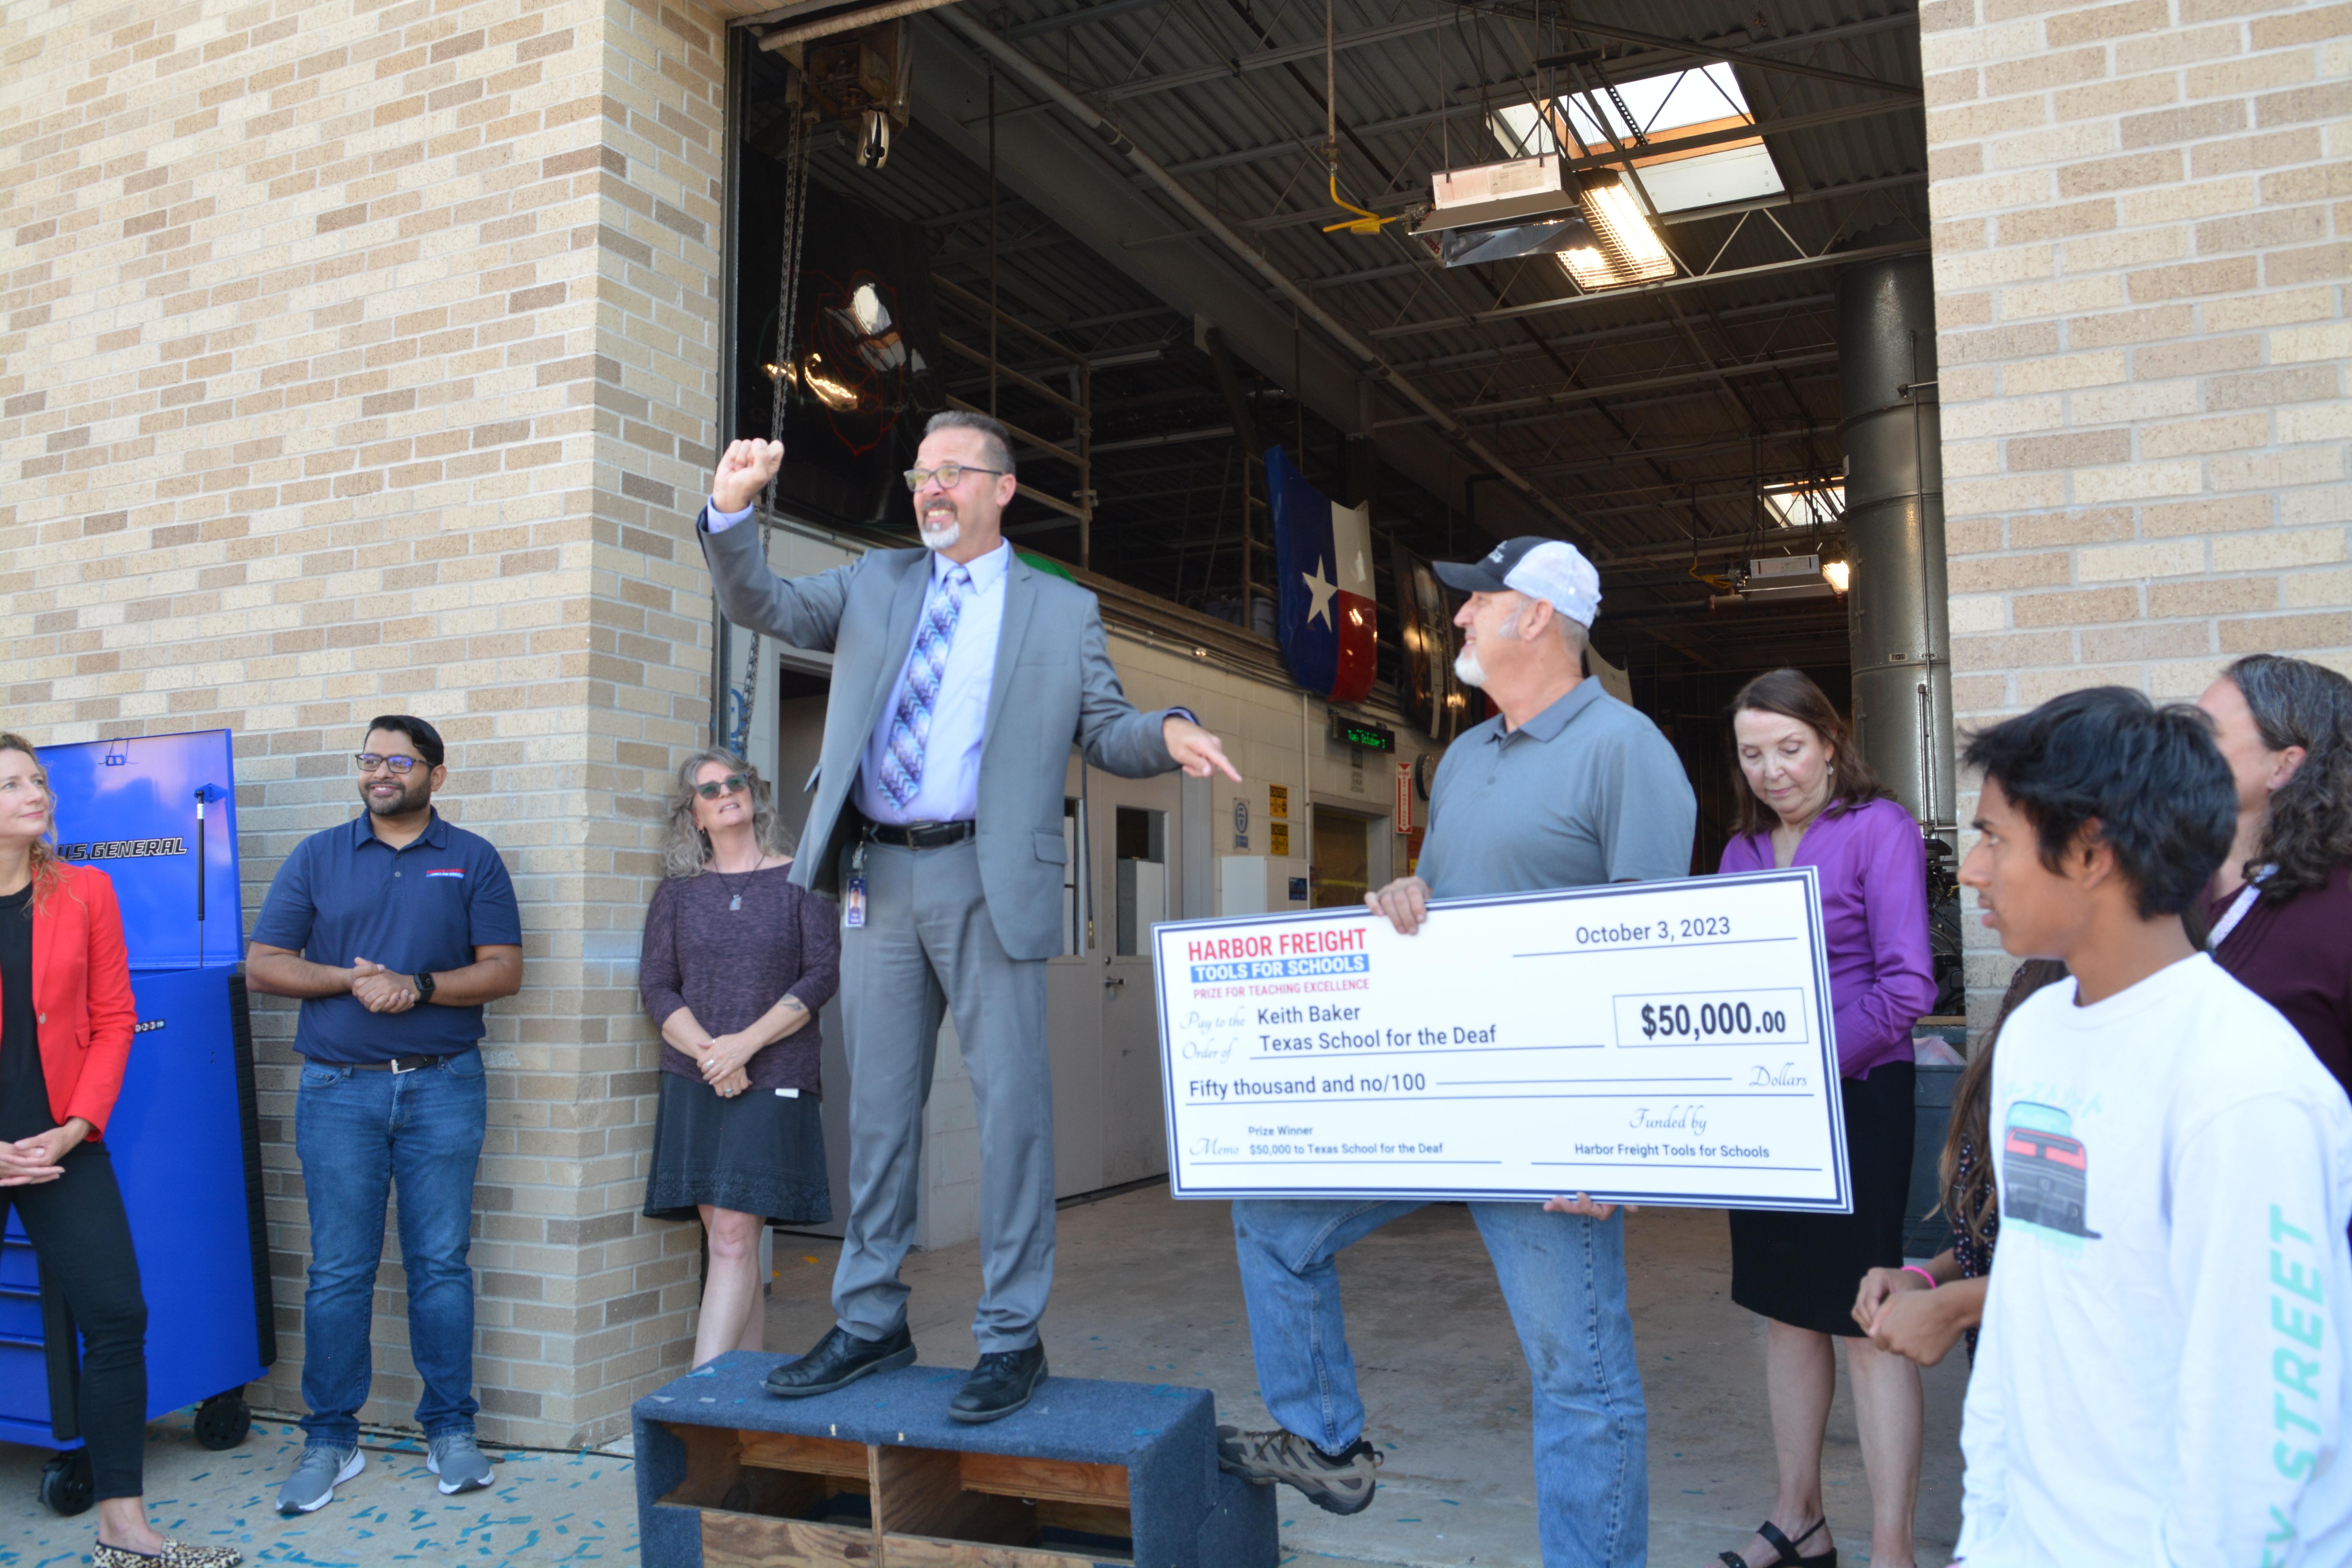 People are standing behind the warehouse, Peter Bailey welcomes Keith Baker with a big check.